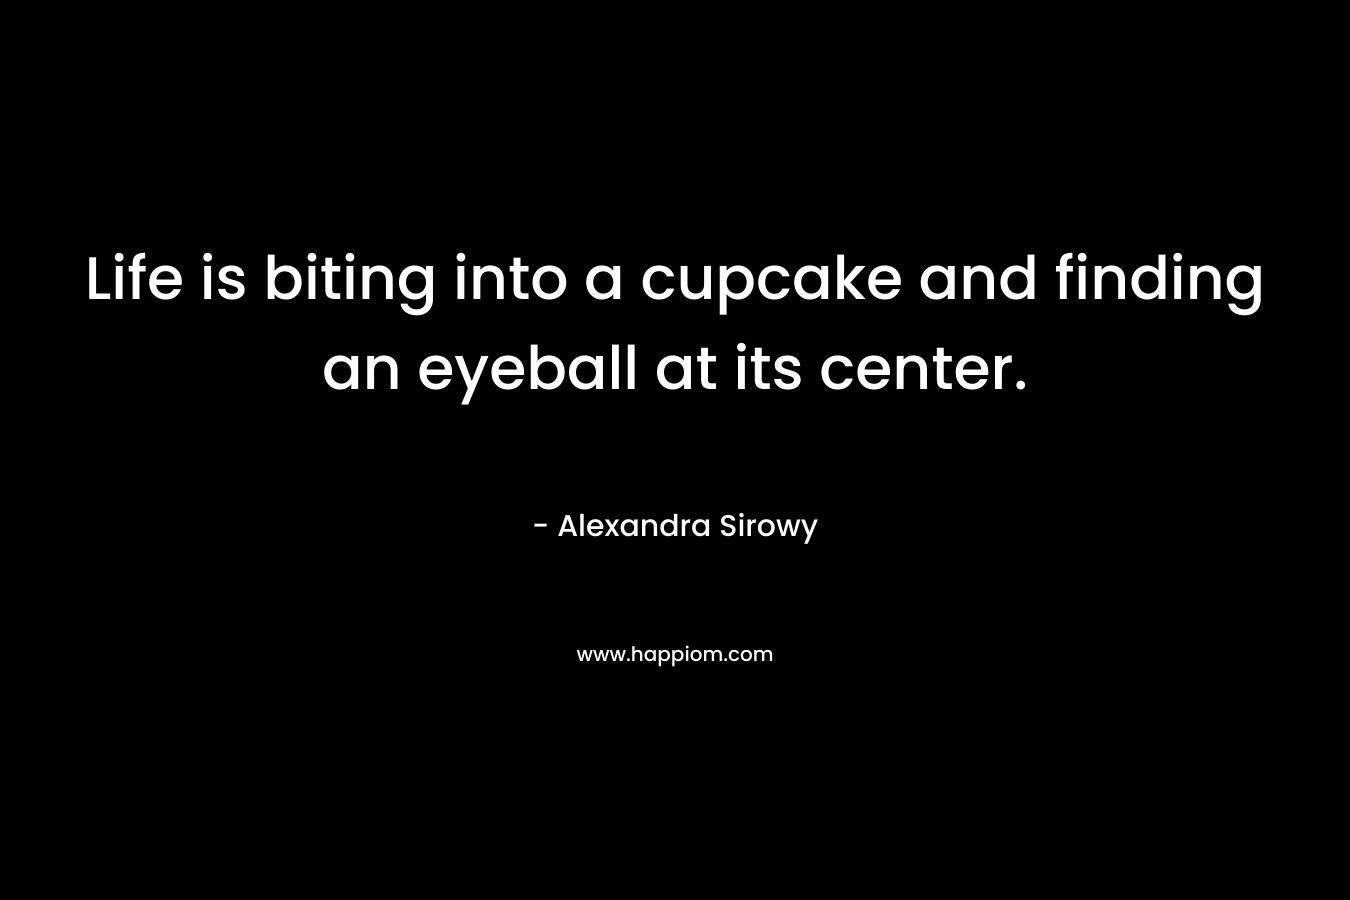 Life is biting into a cupcake and finding an eyeball at its center.